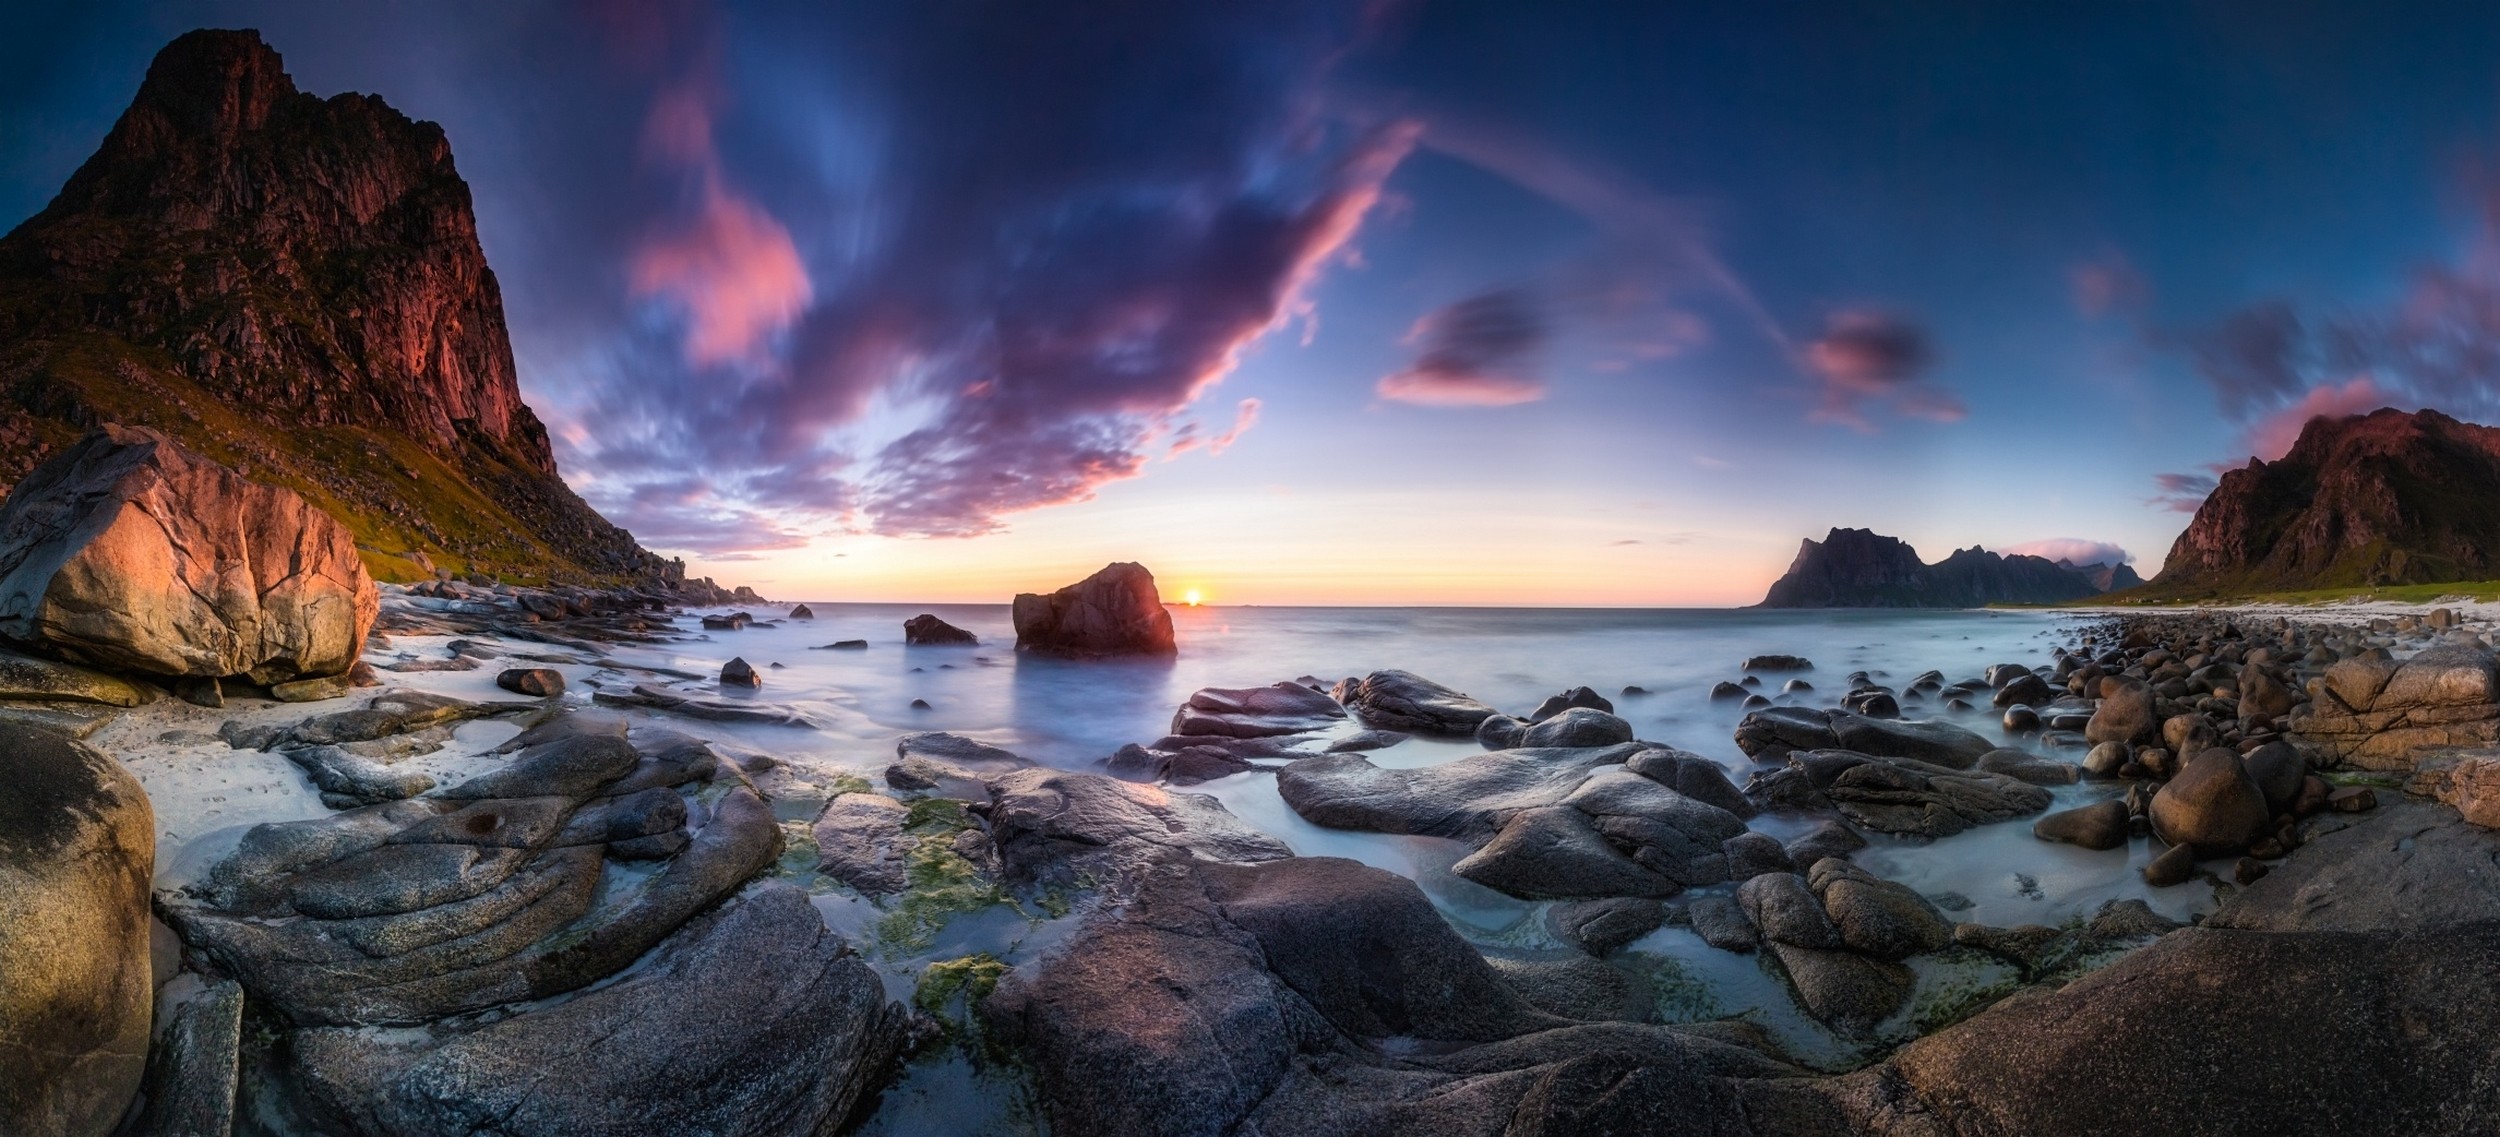 General 2500x1137 long exposure sunset beach cliff clouds rocks sea Norway nature landscape yellow blue coast